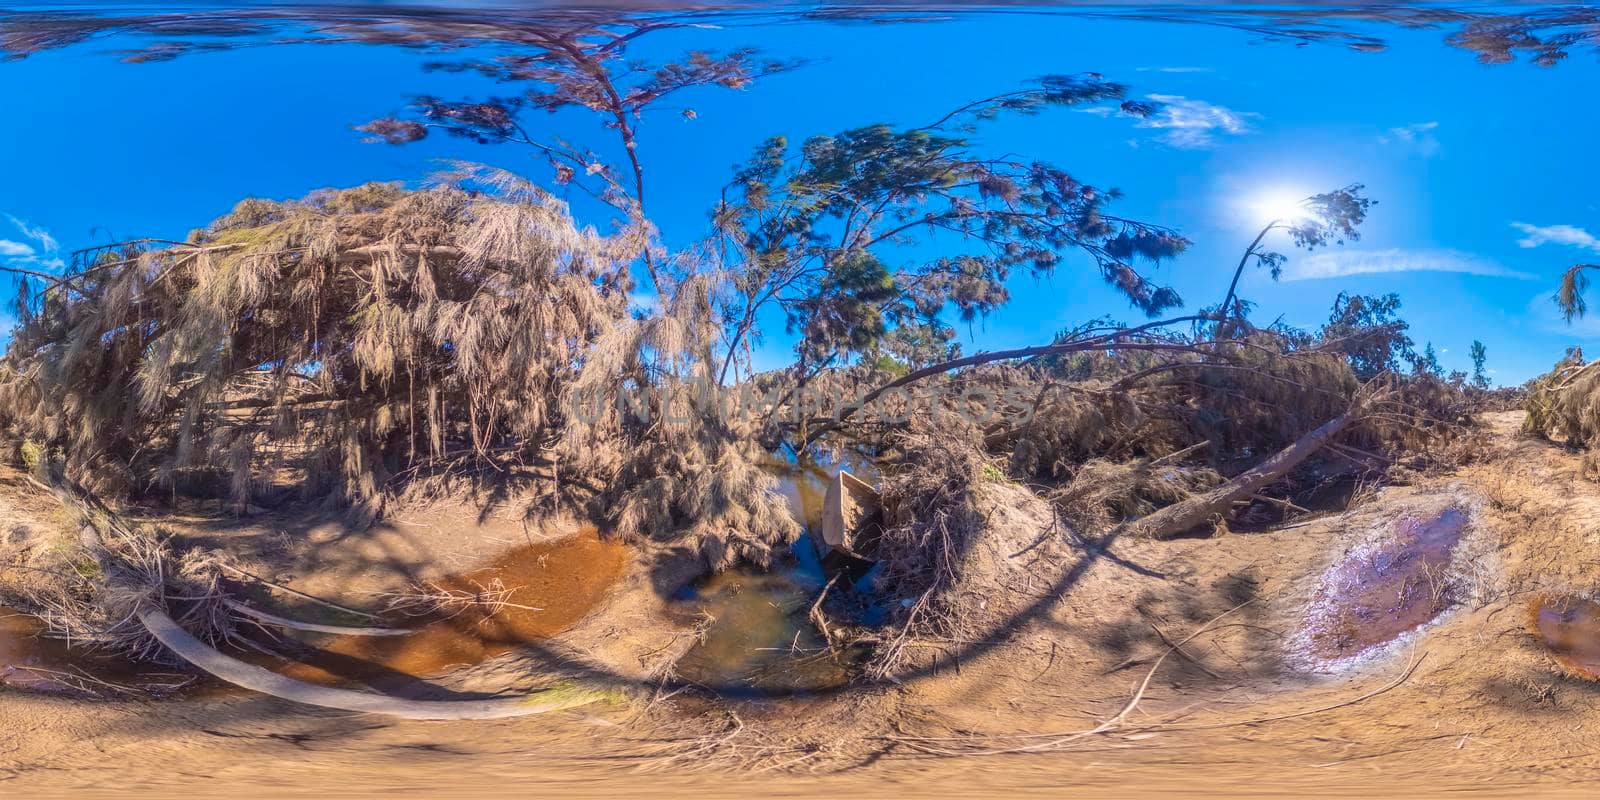 Spherical panoramic photograph of a small boat stuck in reeds in Yarramundi Reserve in regional Australia by WittkePhotos